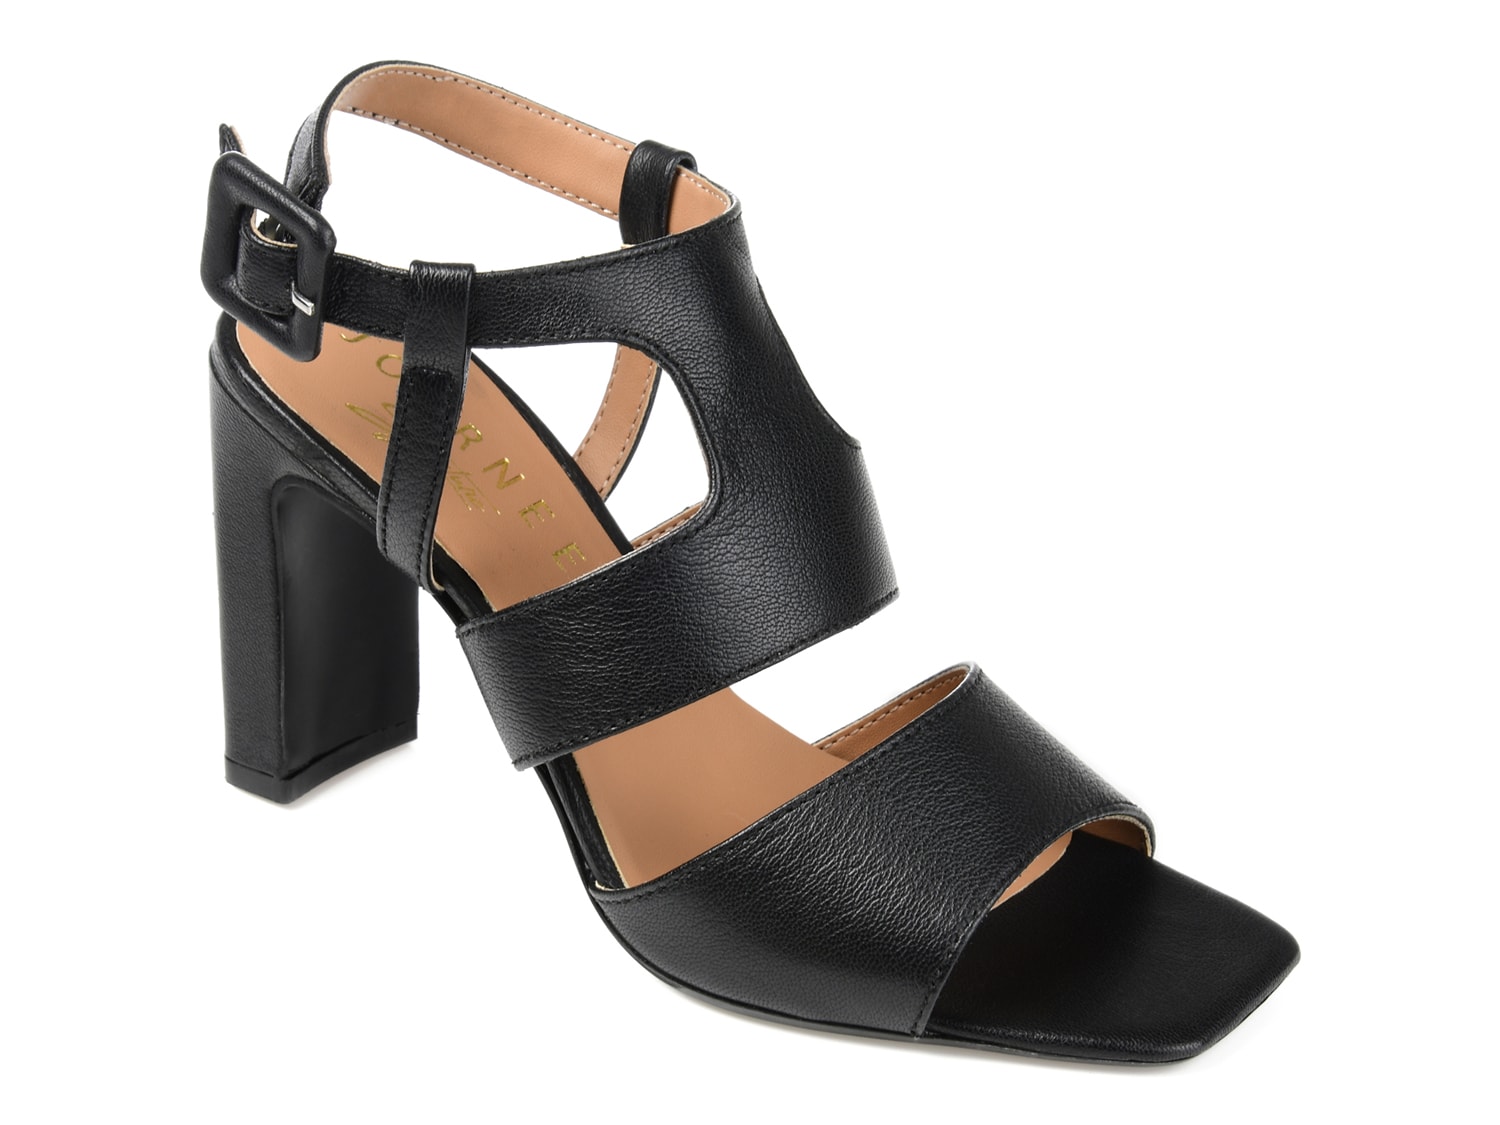 Journee Signature Beckie Sandal - Free Shipping | DSW